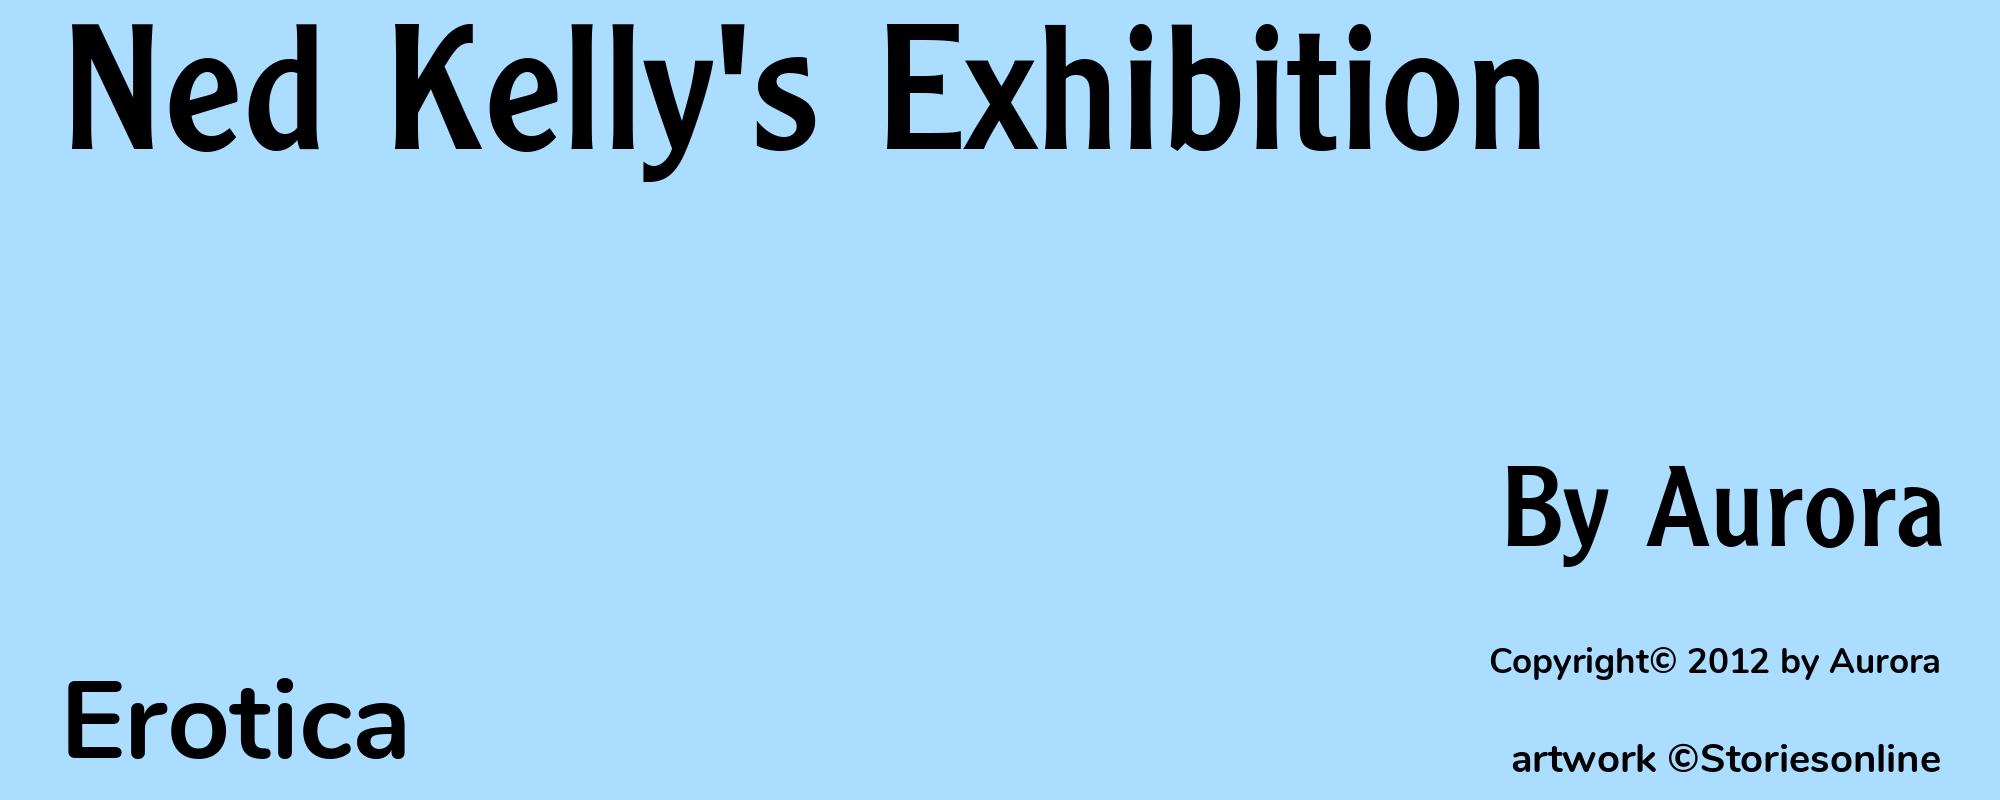 Ned Kelly's Exhibition - Cover